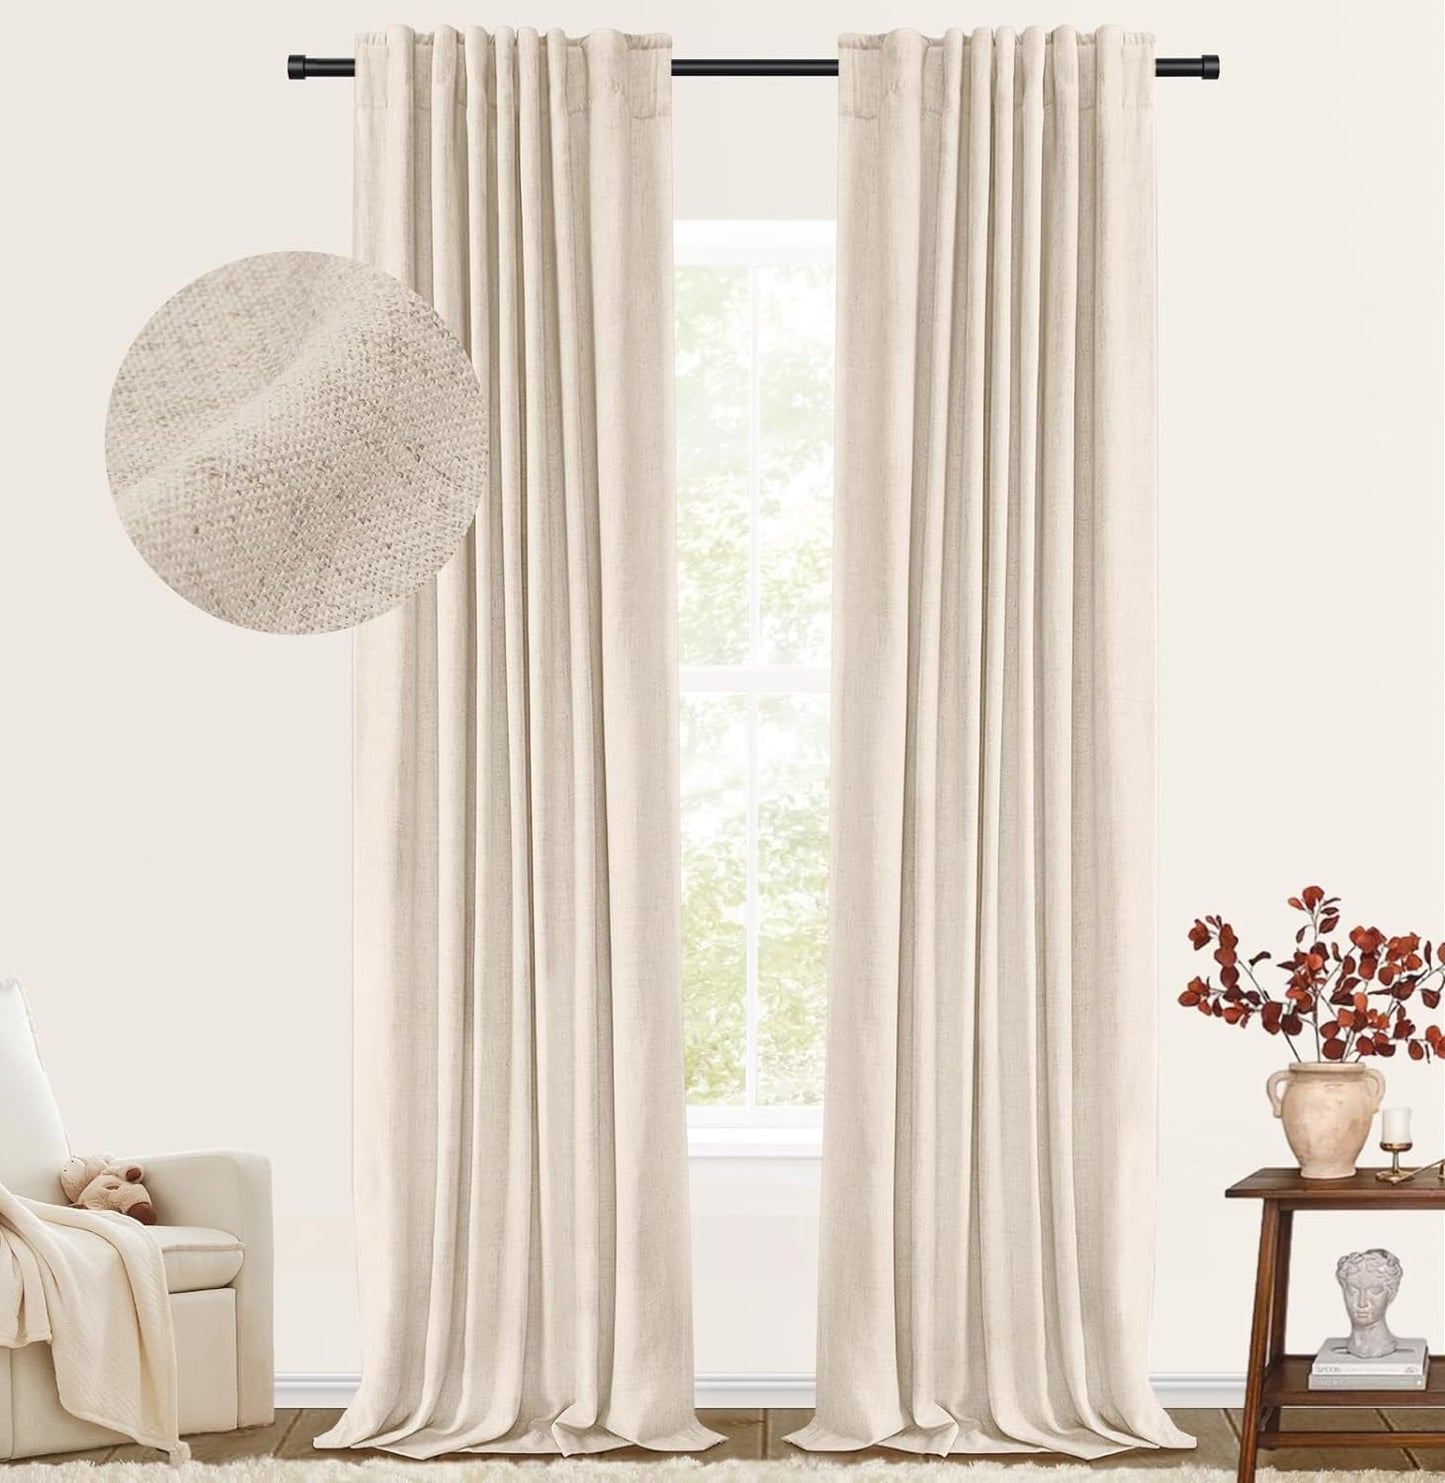 100% Blackout Shield Blackout Curtains for Bedroom Faux Linen Black Out Curtains 84 Inch Length 2 Panels Set, Back Tab/Rod Pocket Thermal Insulated Curtains with Black Liner, 50W X 84L, Dark Grey  100% Blackout Shield 04 Oatmeal 50''W X 102''L 